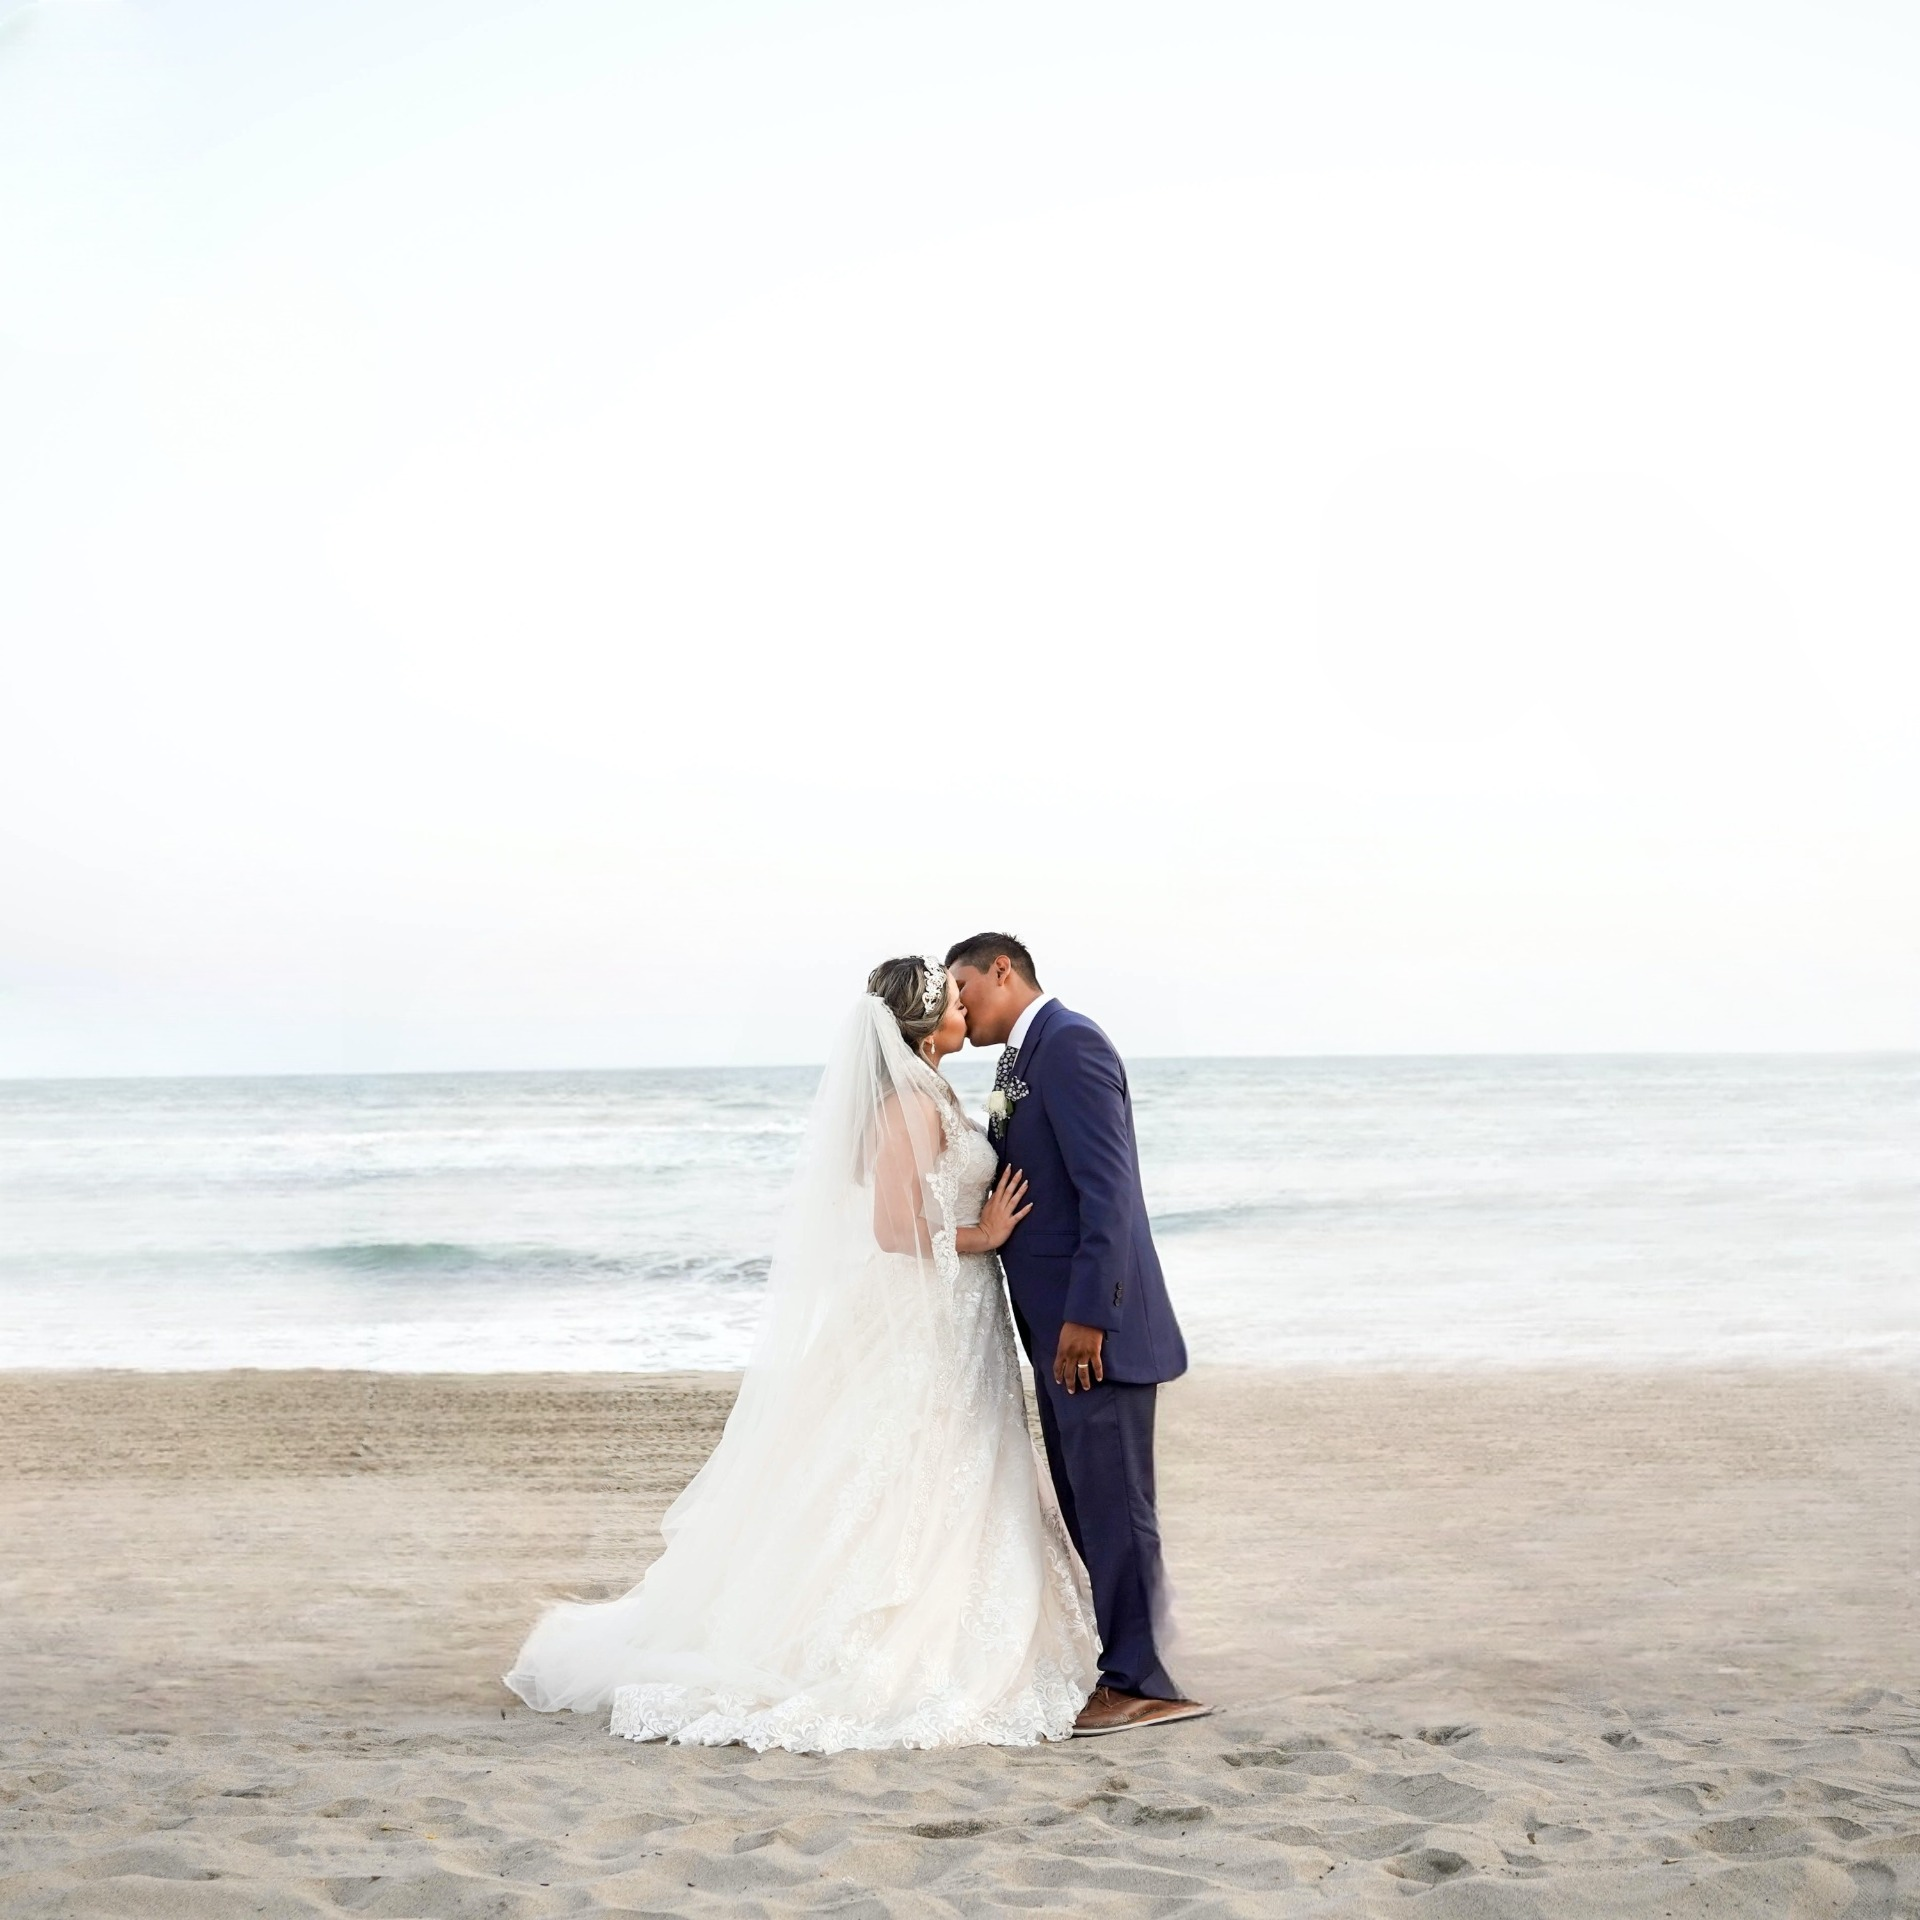 The image of the couple kissing on their wedding day on the beach with the wedding party removed.